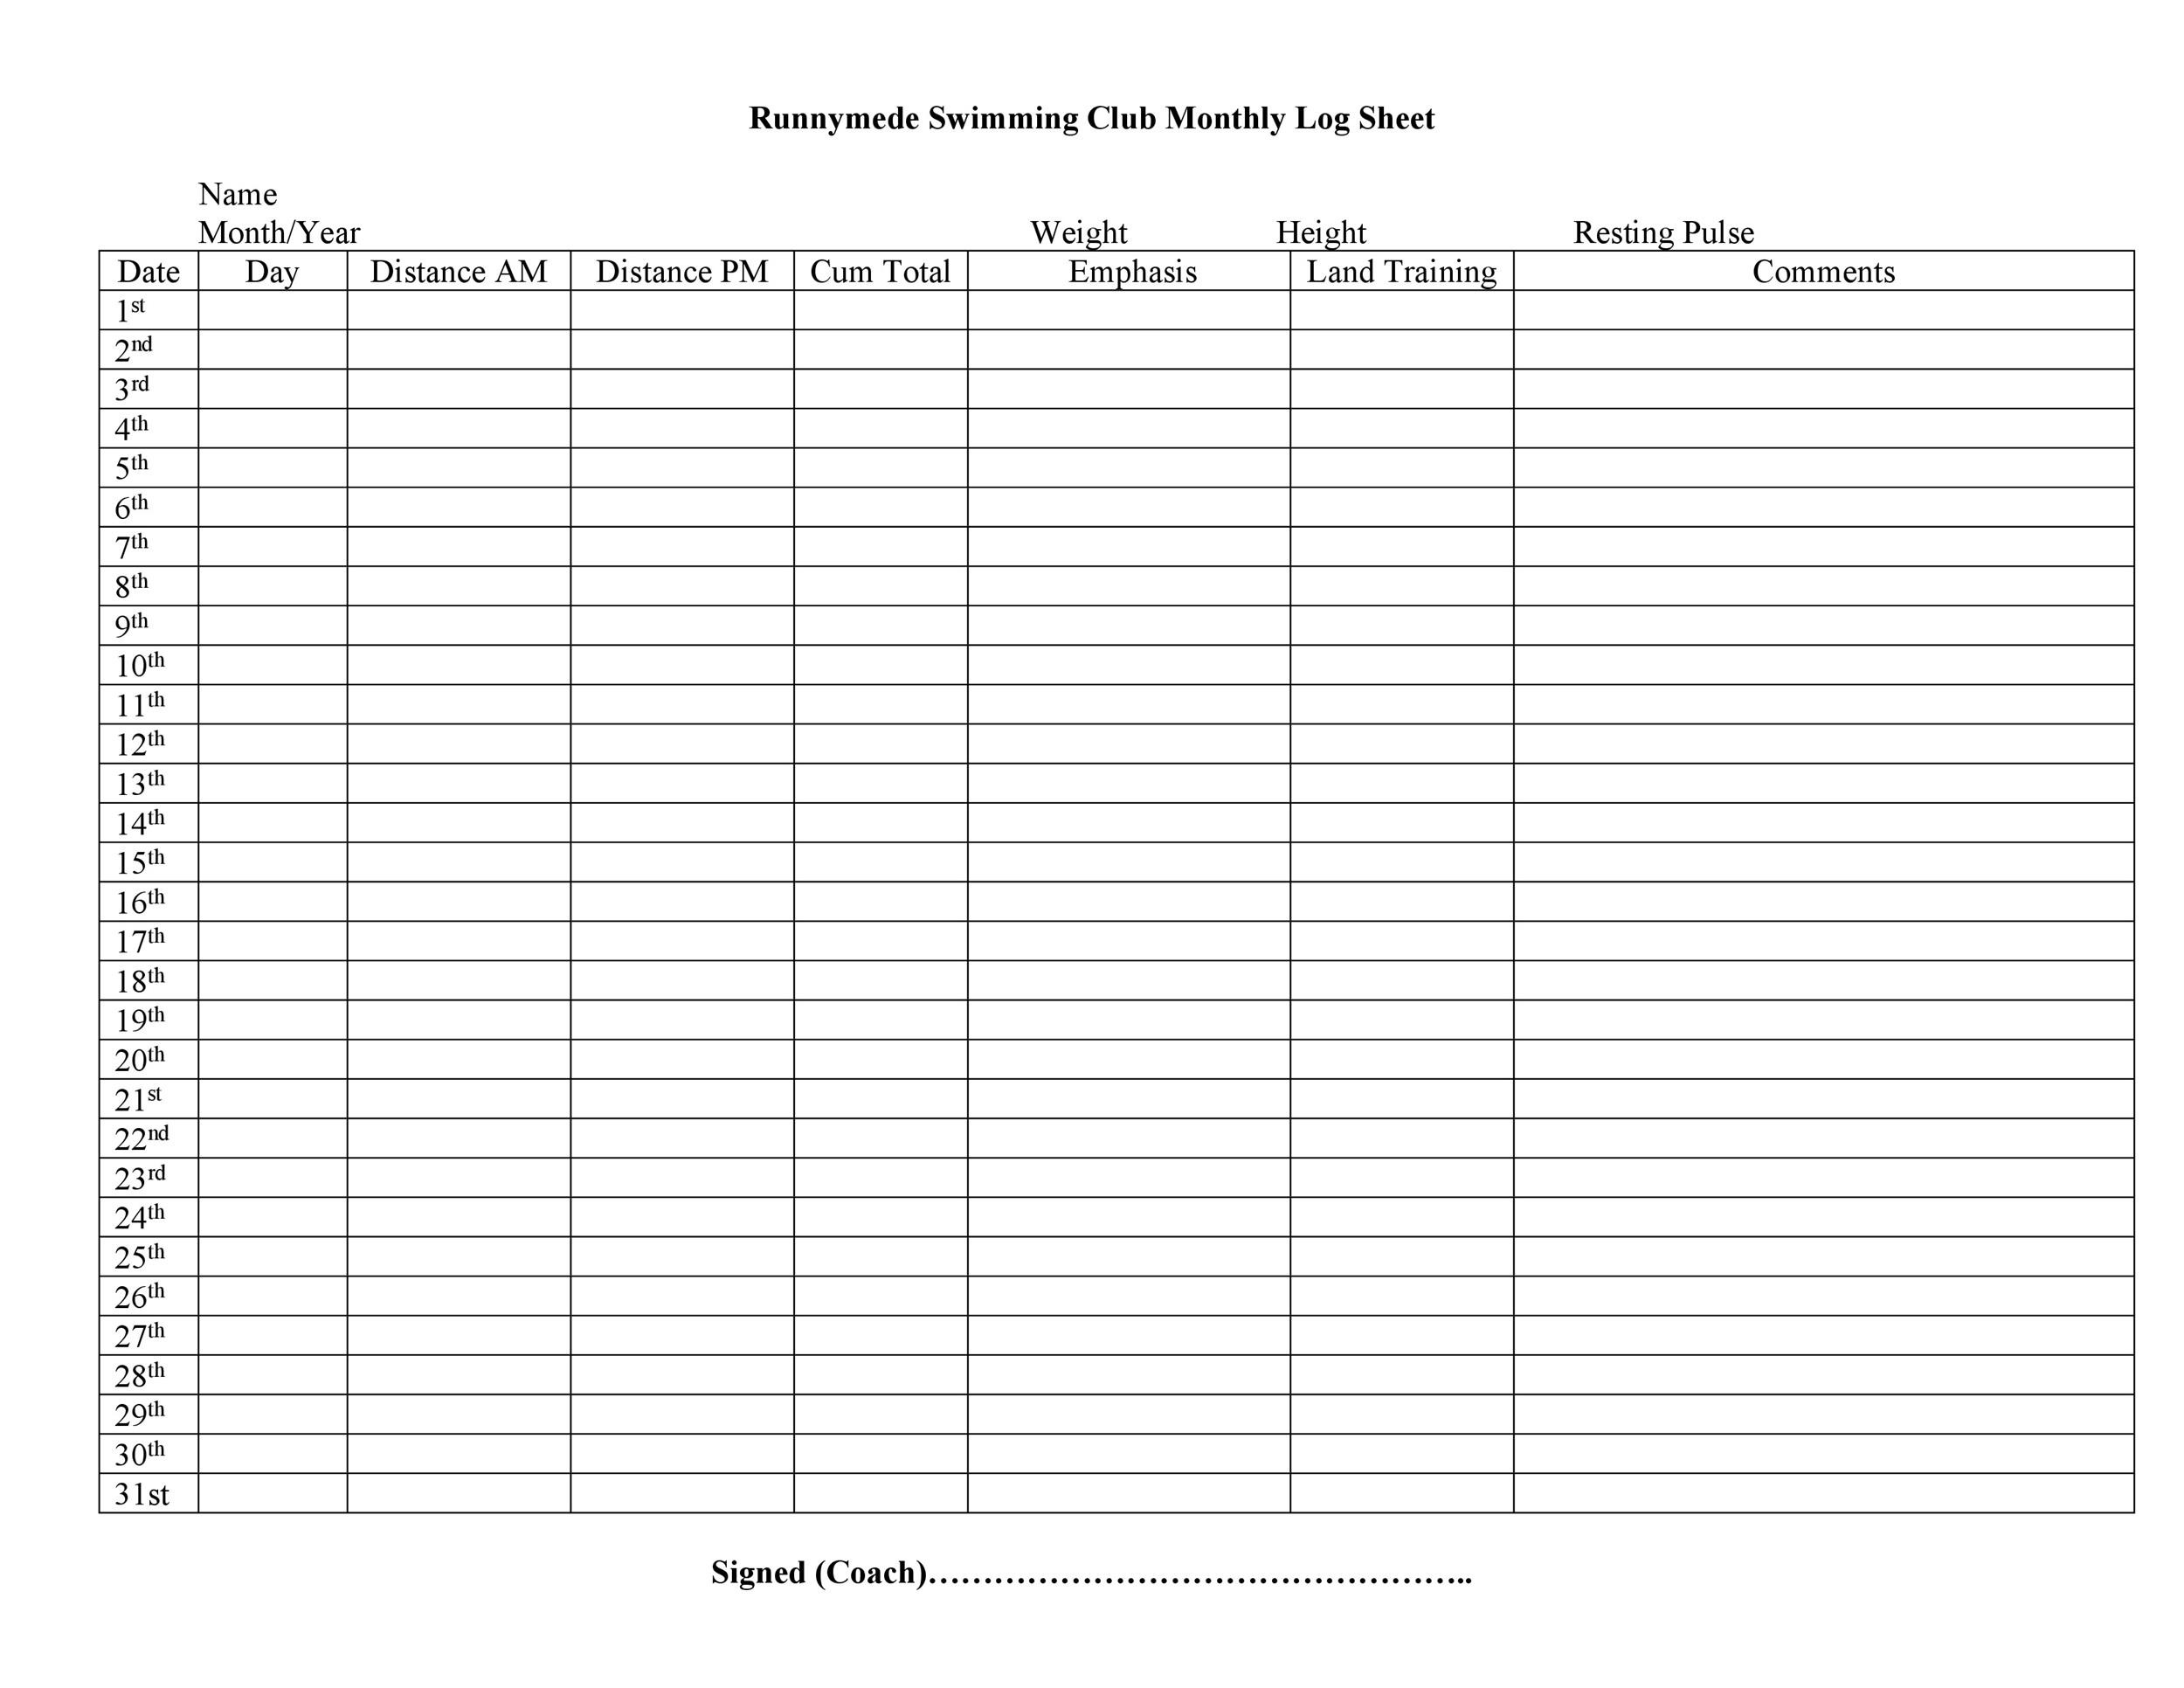 blank-employee-printable-log-form-images-printable-forms-free-online